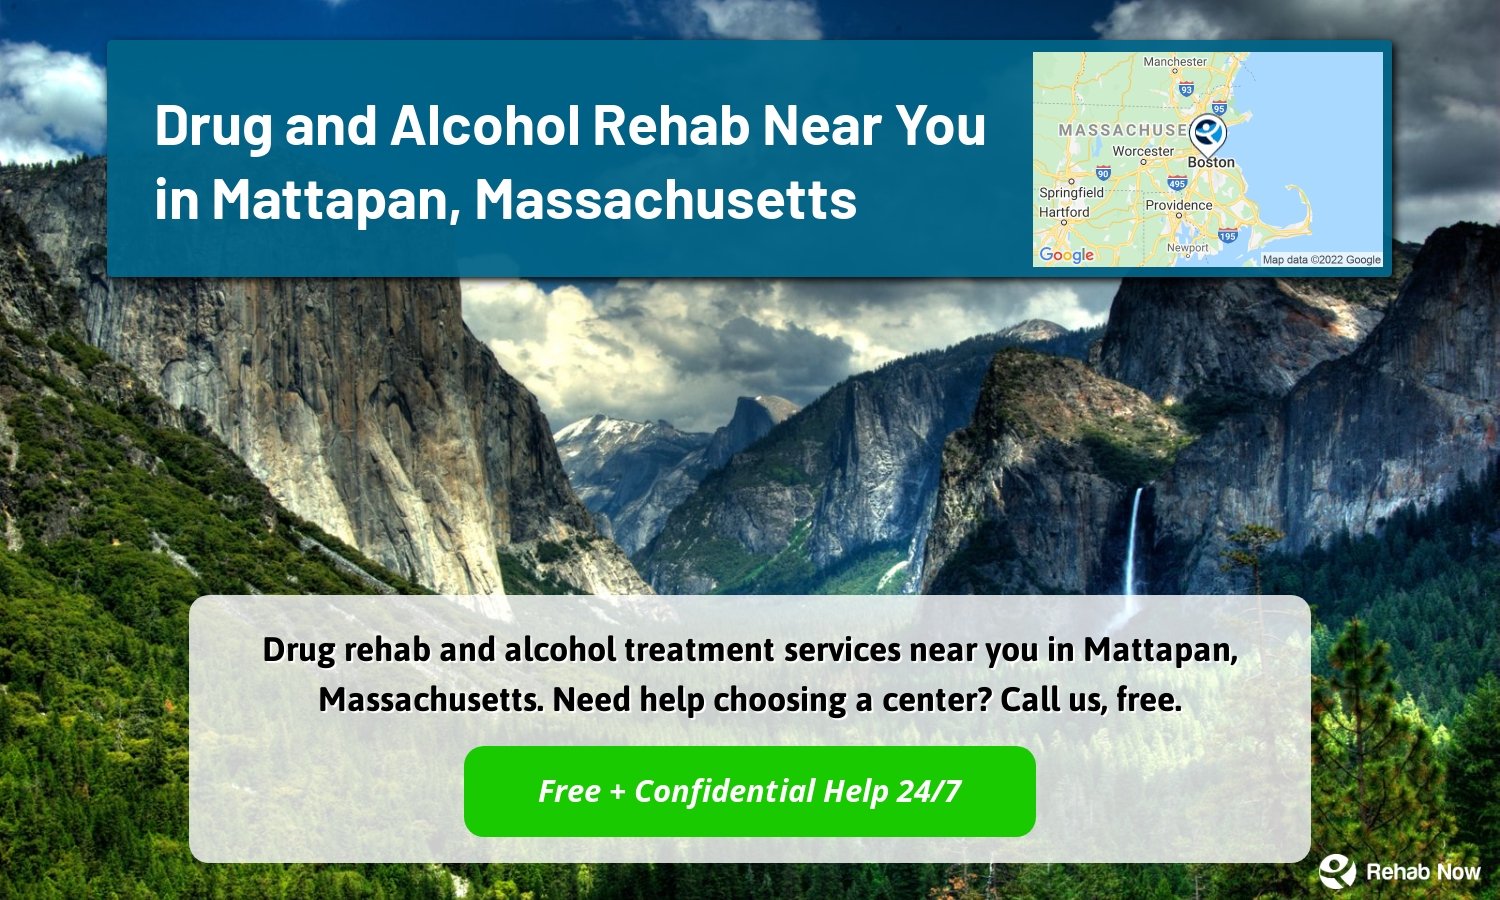 Drug rehab and alcohol treatment services near you in Mattapan, Massachusetts. Need help choosing a center? Call us, free.